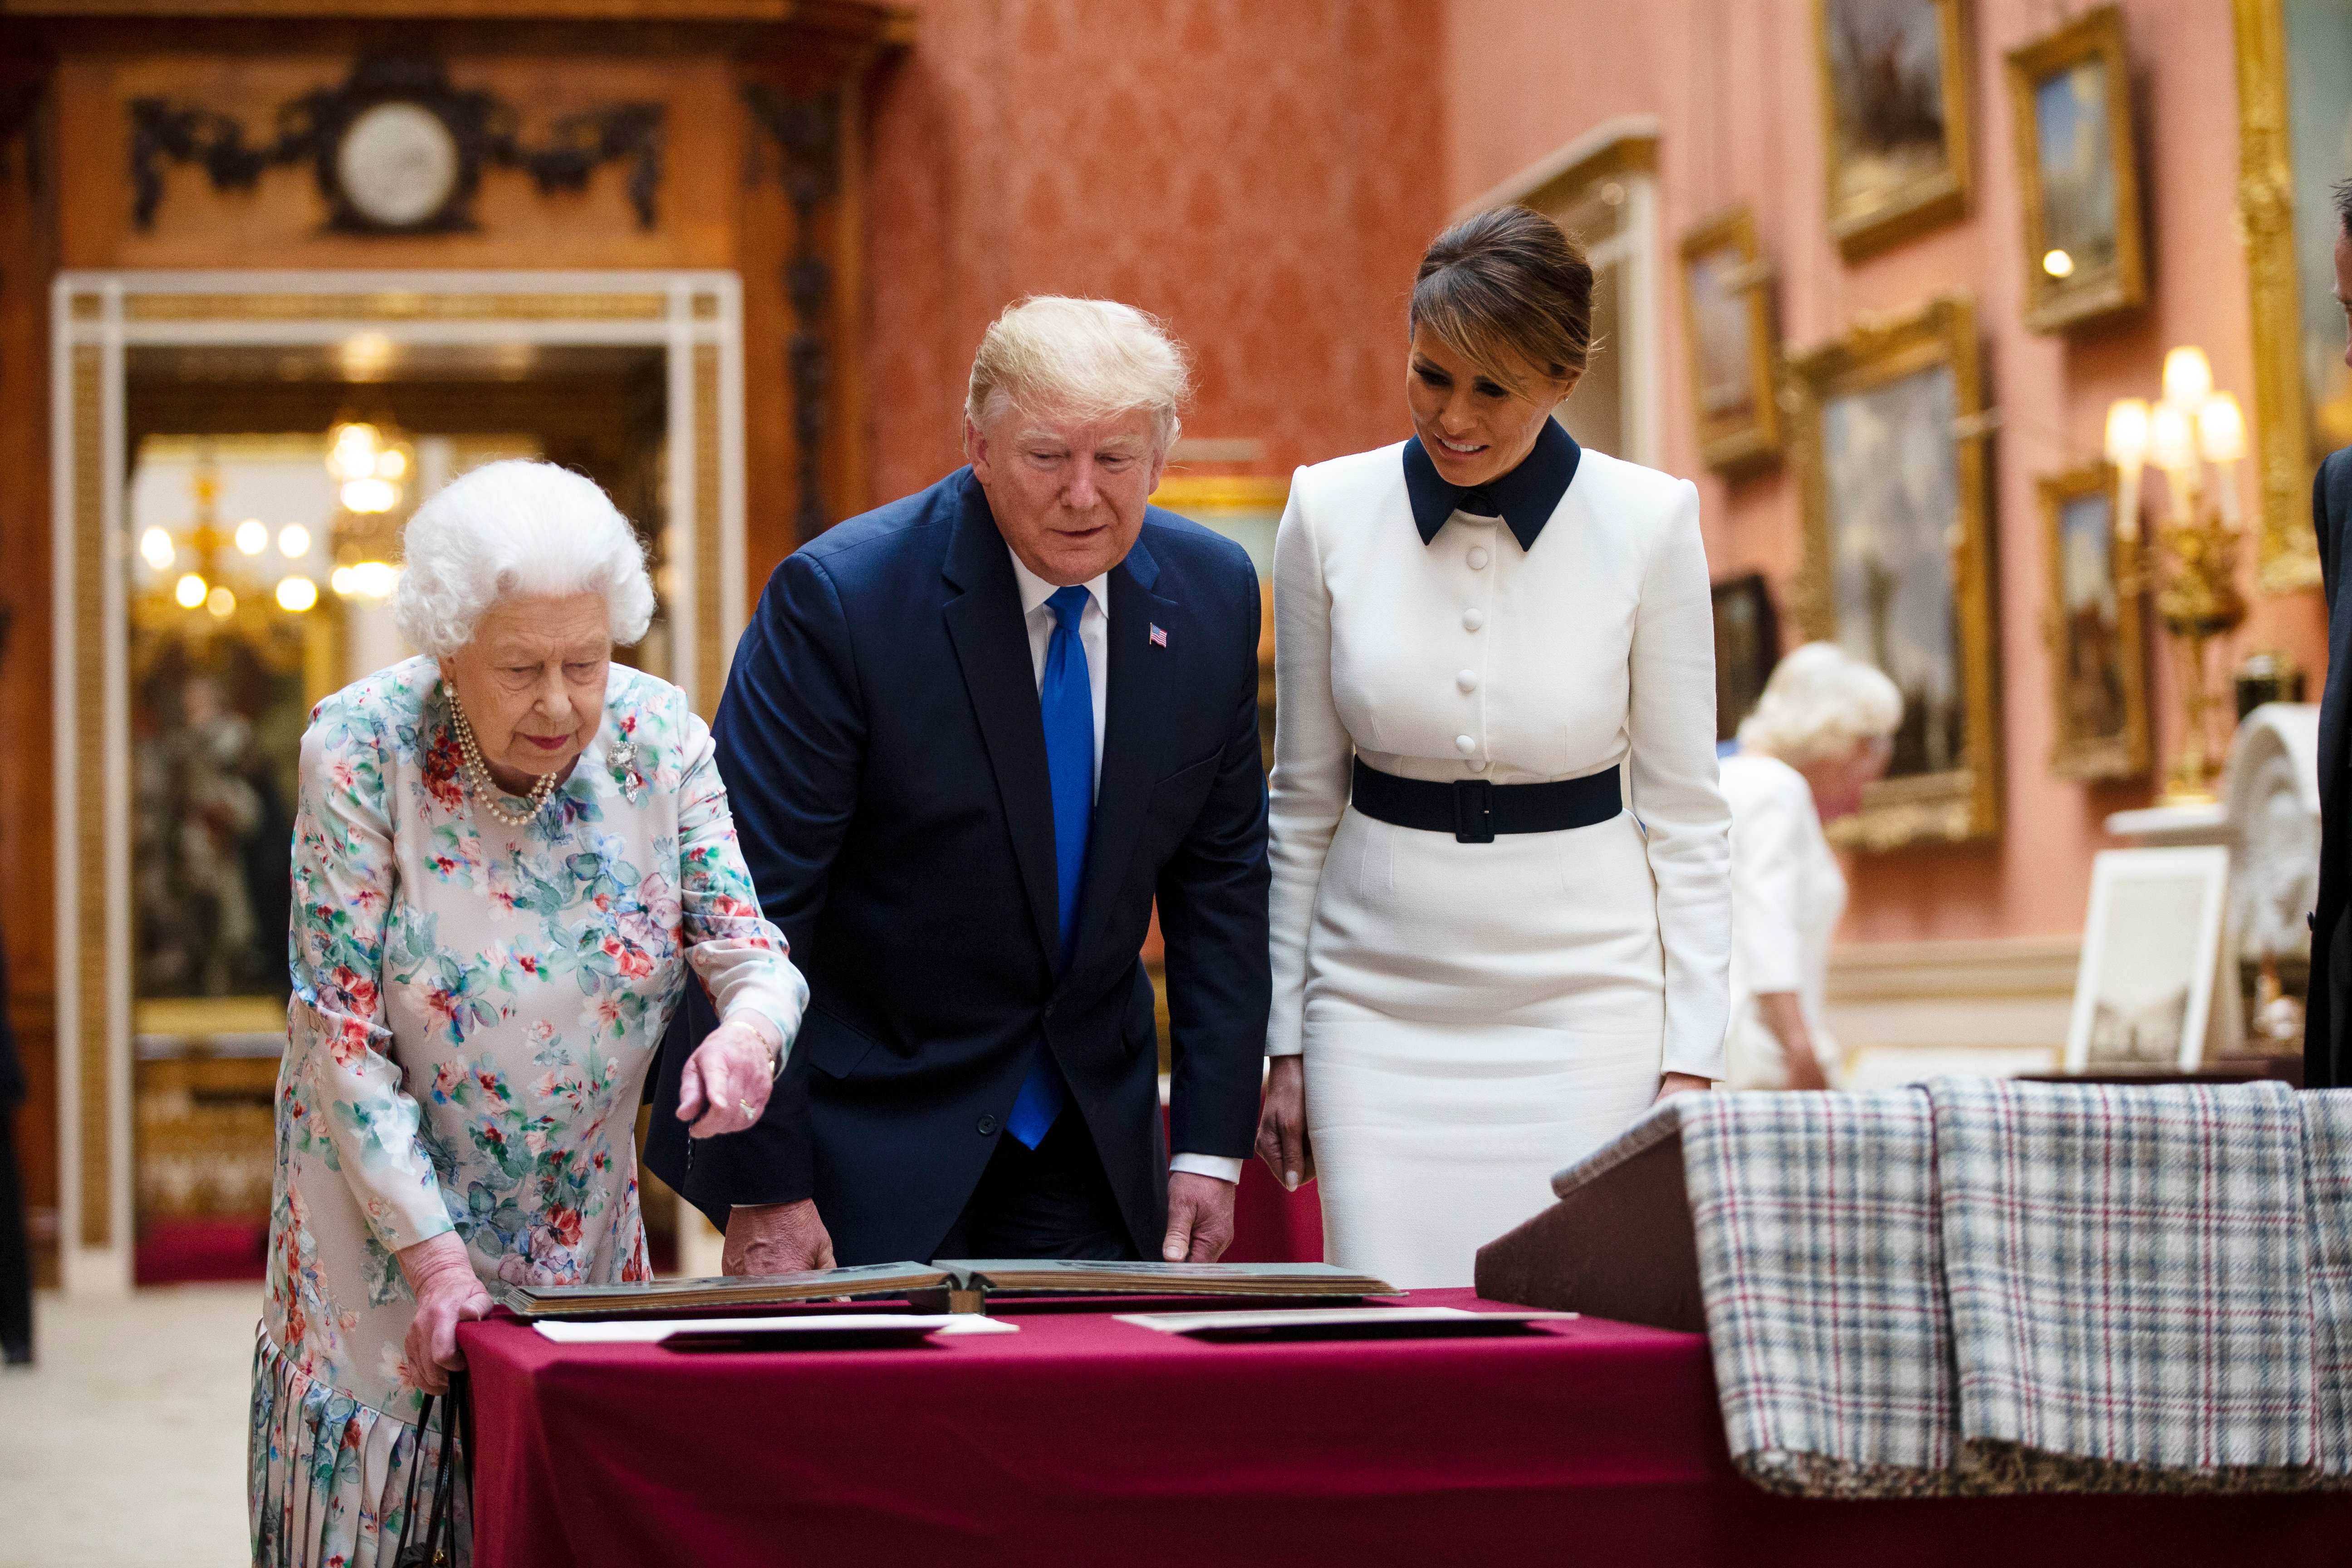 Queen Elizabeth II, US President Donald Trump and First Lady Melania Trump view American items in the Royal collection at Buckingham Palace on June 3, 2019 in London, England. (Ian Vogler - WPA Pool/Getty Images)